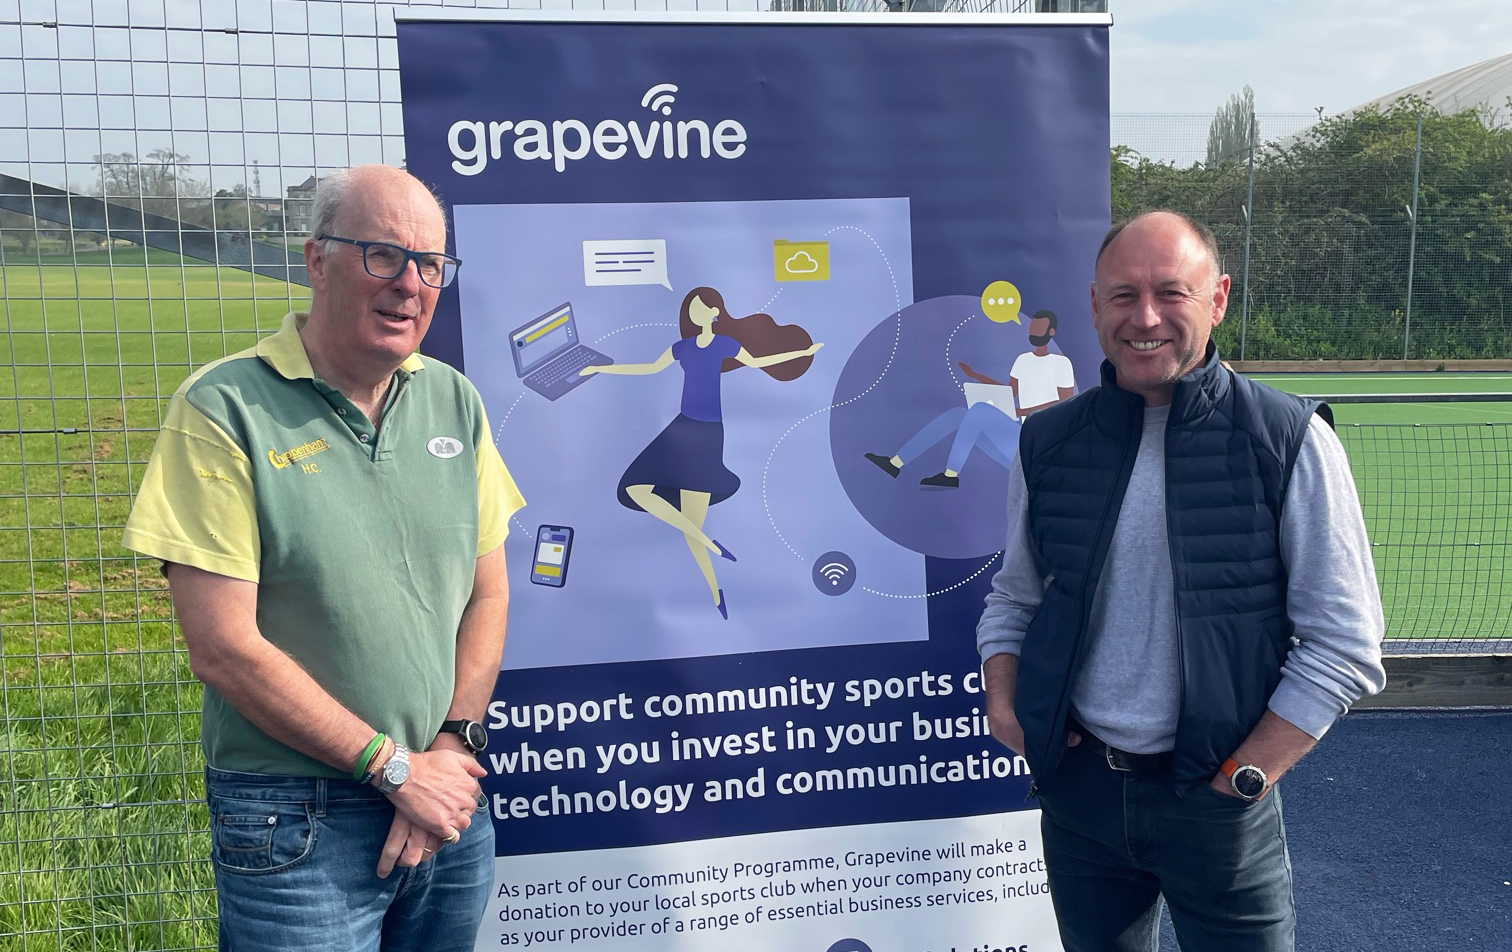 Staff from Chippenham Hockey Club stand alongside the Grapevine Community Programme pull up banner.